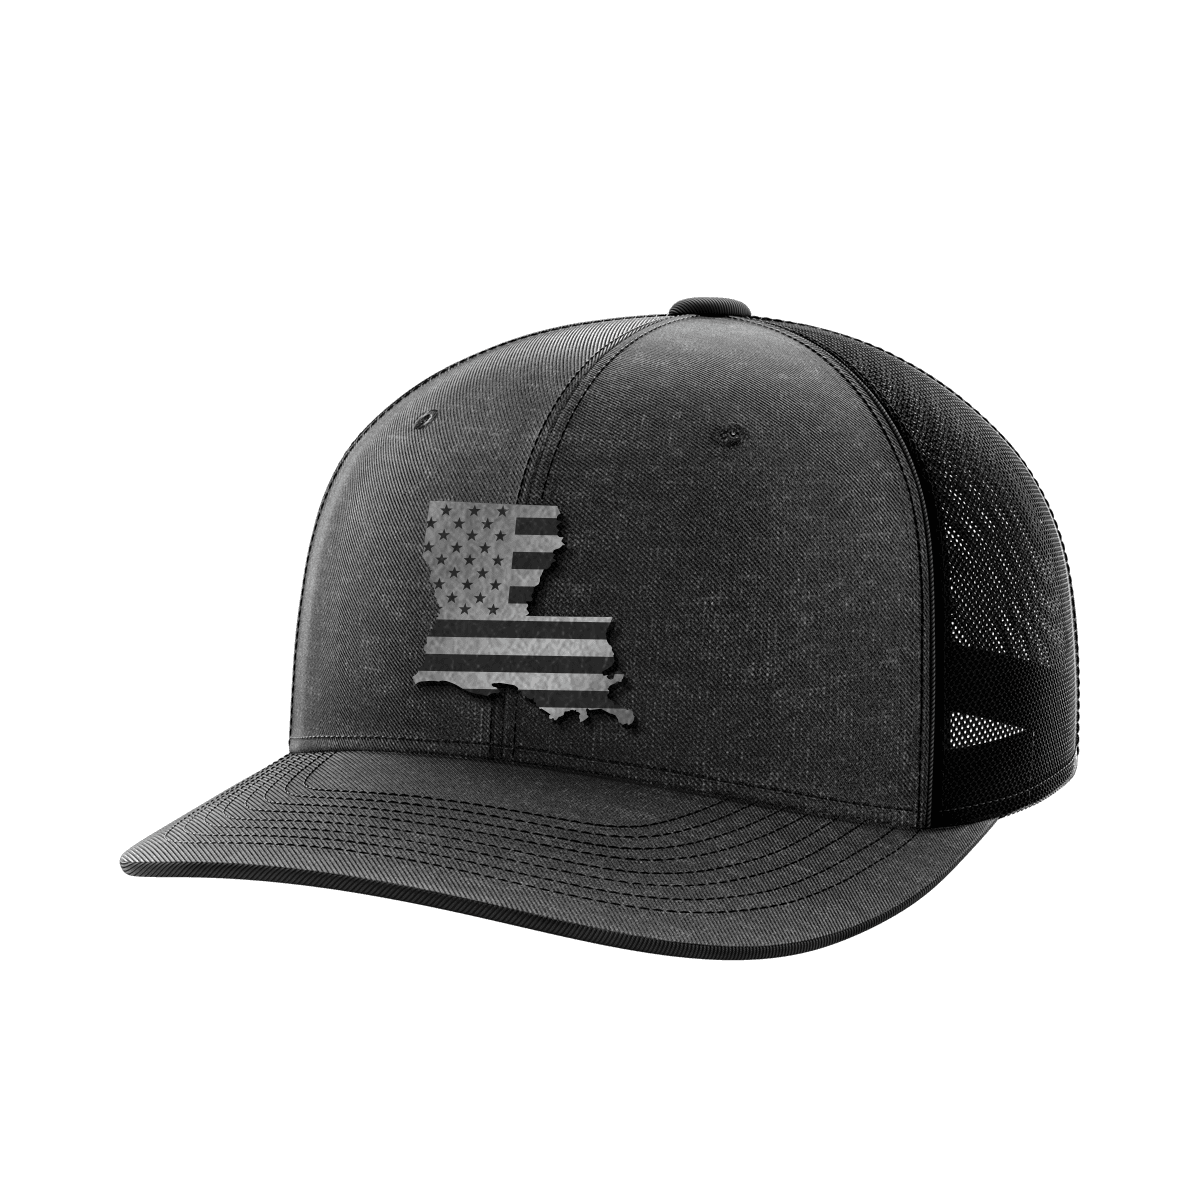 Louisiana United Collection (black leather) - Greater Half